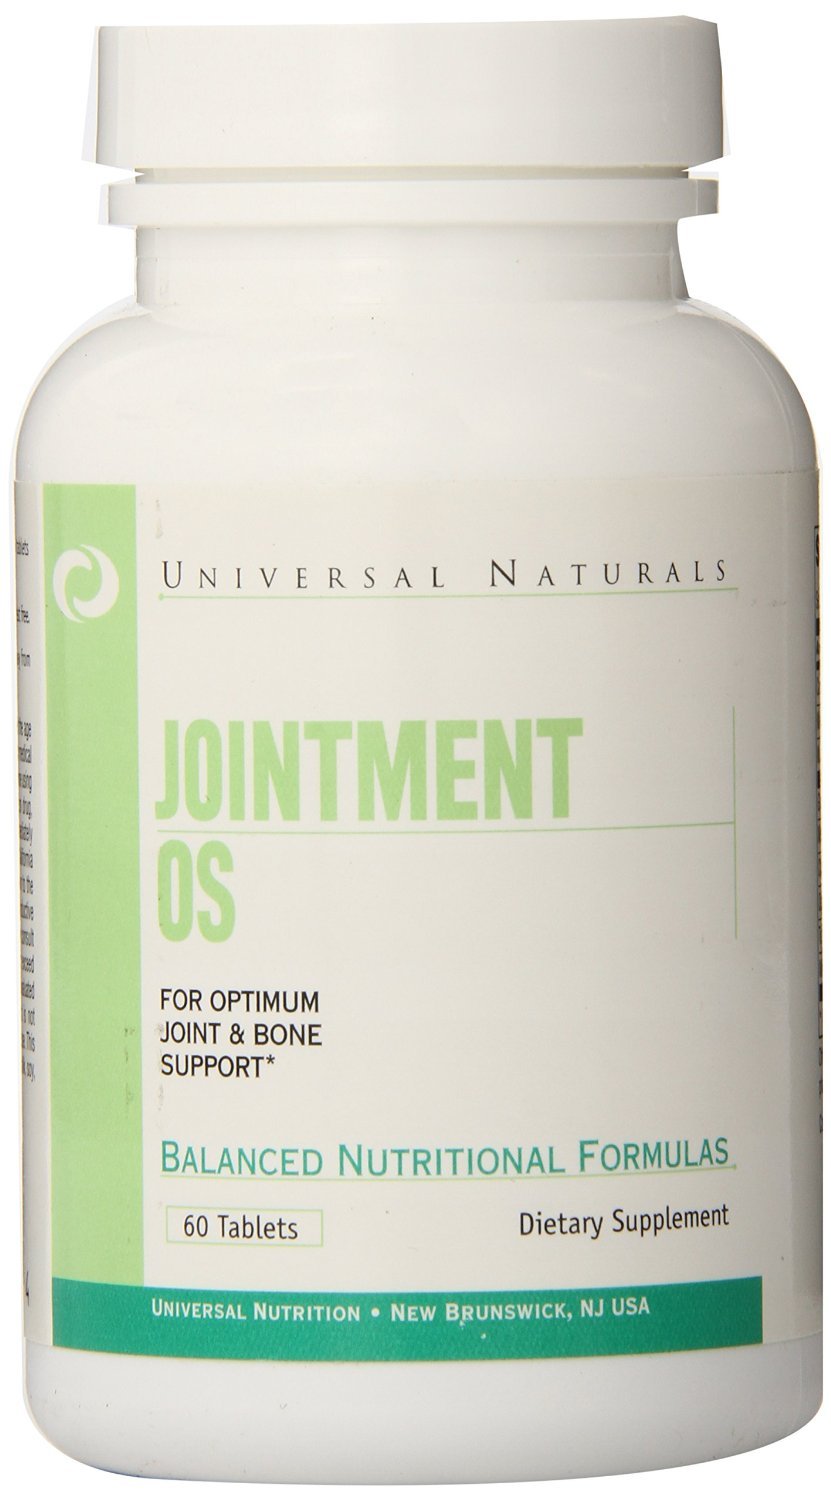 Jointment OS, 60 pcs, Universal Nutrition. Glucosamine Chondroitin. General Health Ligament and Joint strengthening 